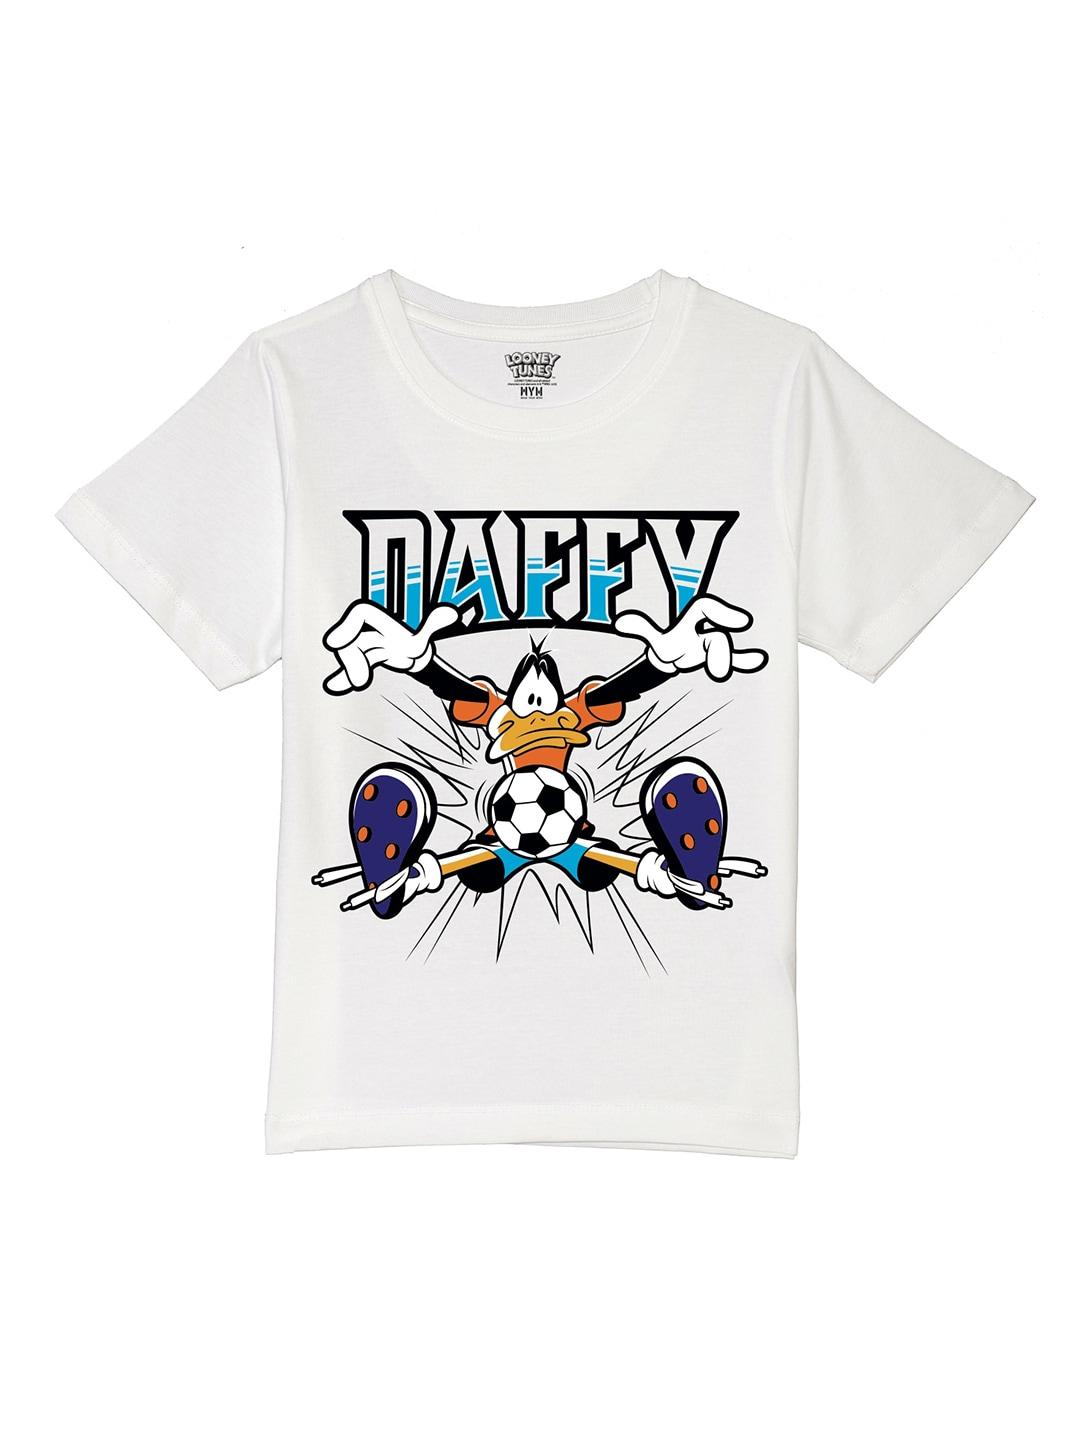 Wear Your Mind Boys Looney Tunes Printed Pure Cotton T-shirt